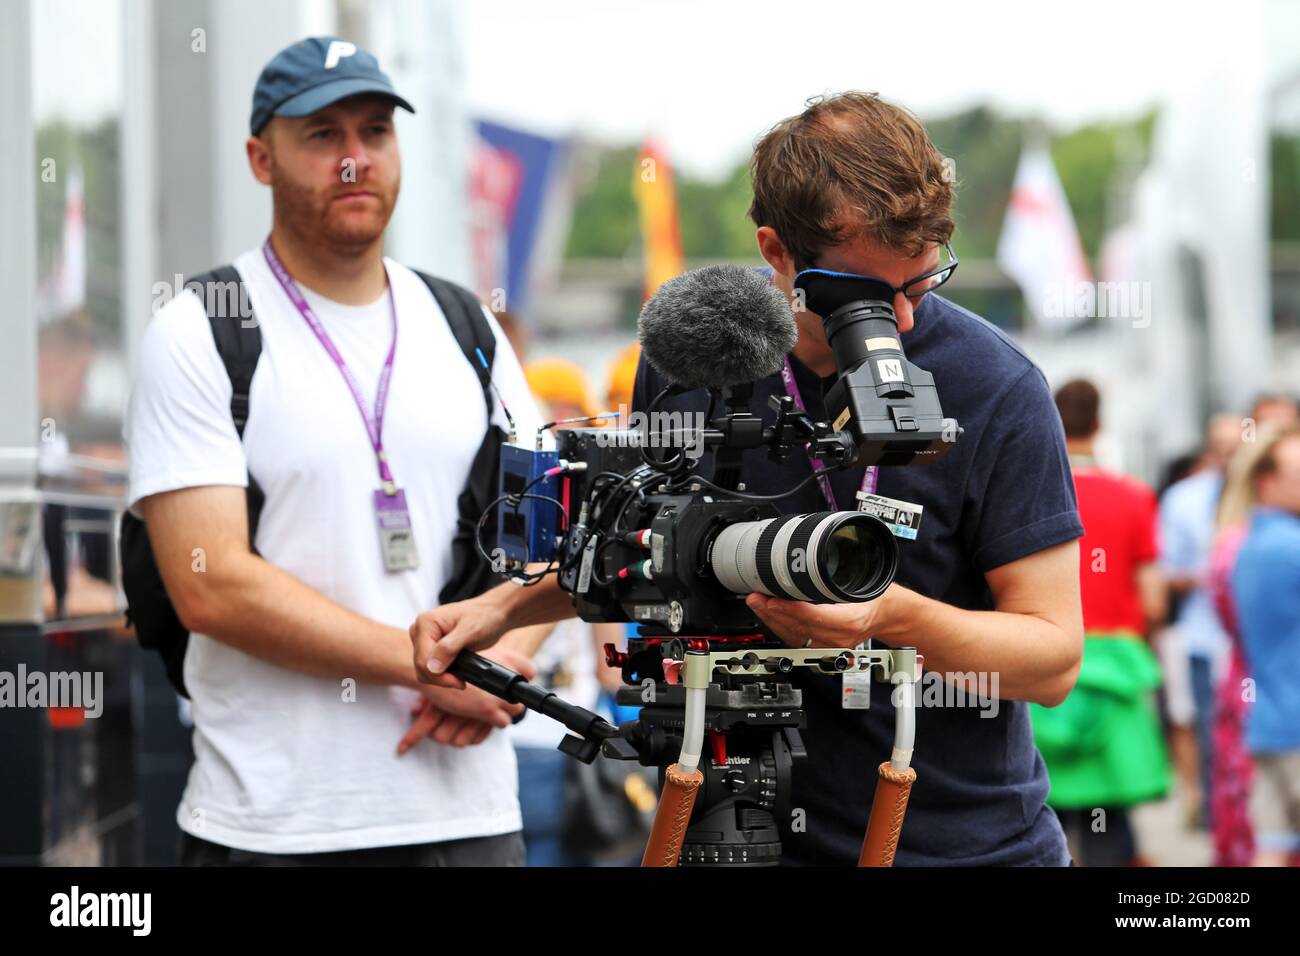 Mercedes AMG F1 being filmed by the Netflix production 'Drive to Survive'. German Grand Prix, Sunday 28th July 2019. Hockenheim, Germany. Stock Photo